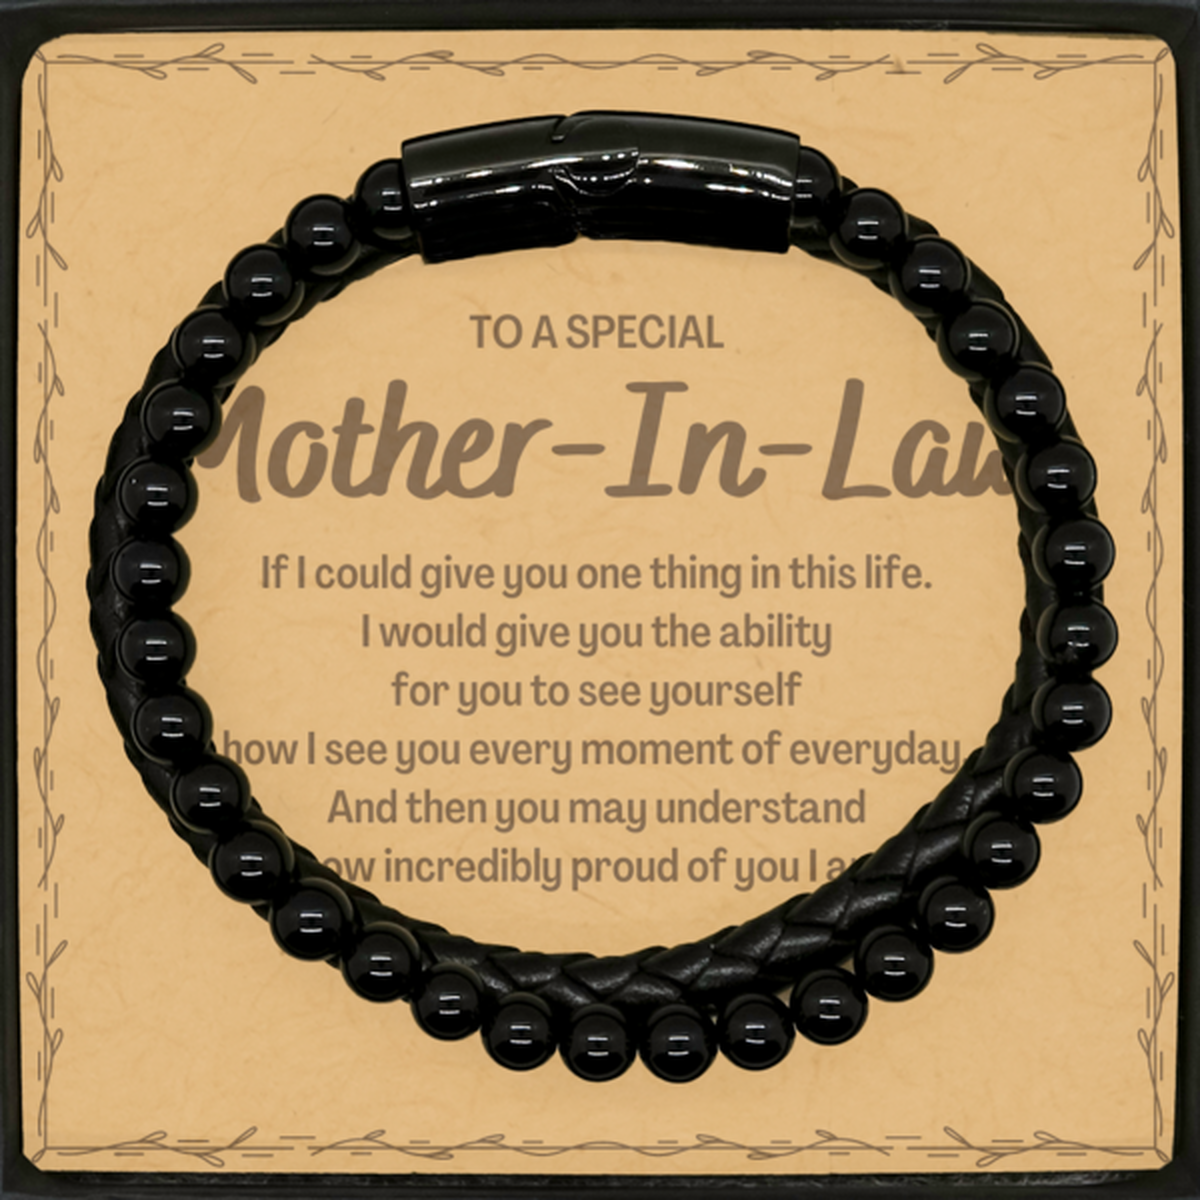 To My Mother-In-Law Stone Leather Bracelets, Gifts For Mother-In-Law Message Card, Inspirational Gifts for Christmas Birthday, Epic Gifts for Mother-In-Law To A Special Mother-In-Law how incredibly proud of you I am